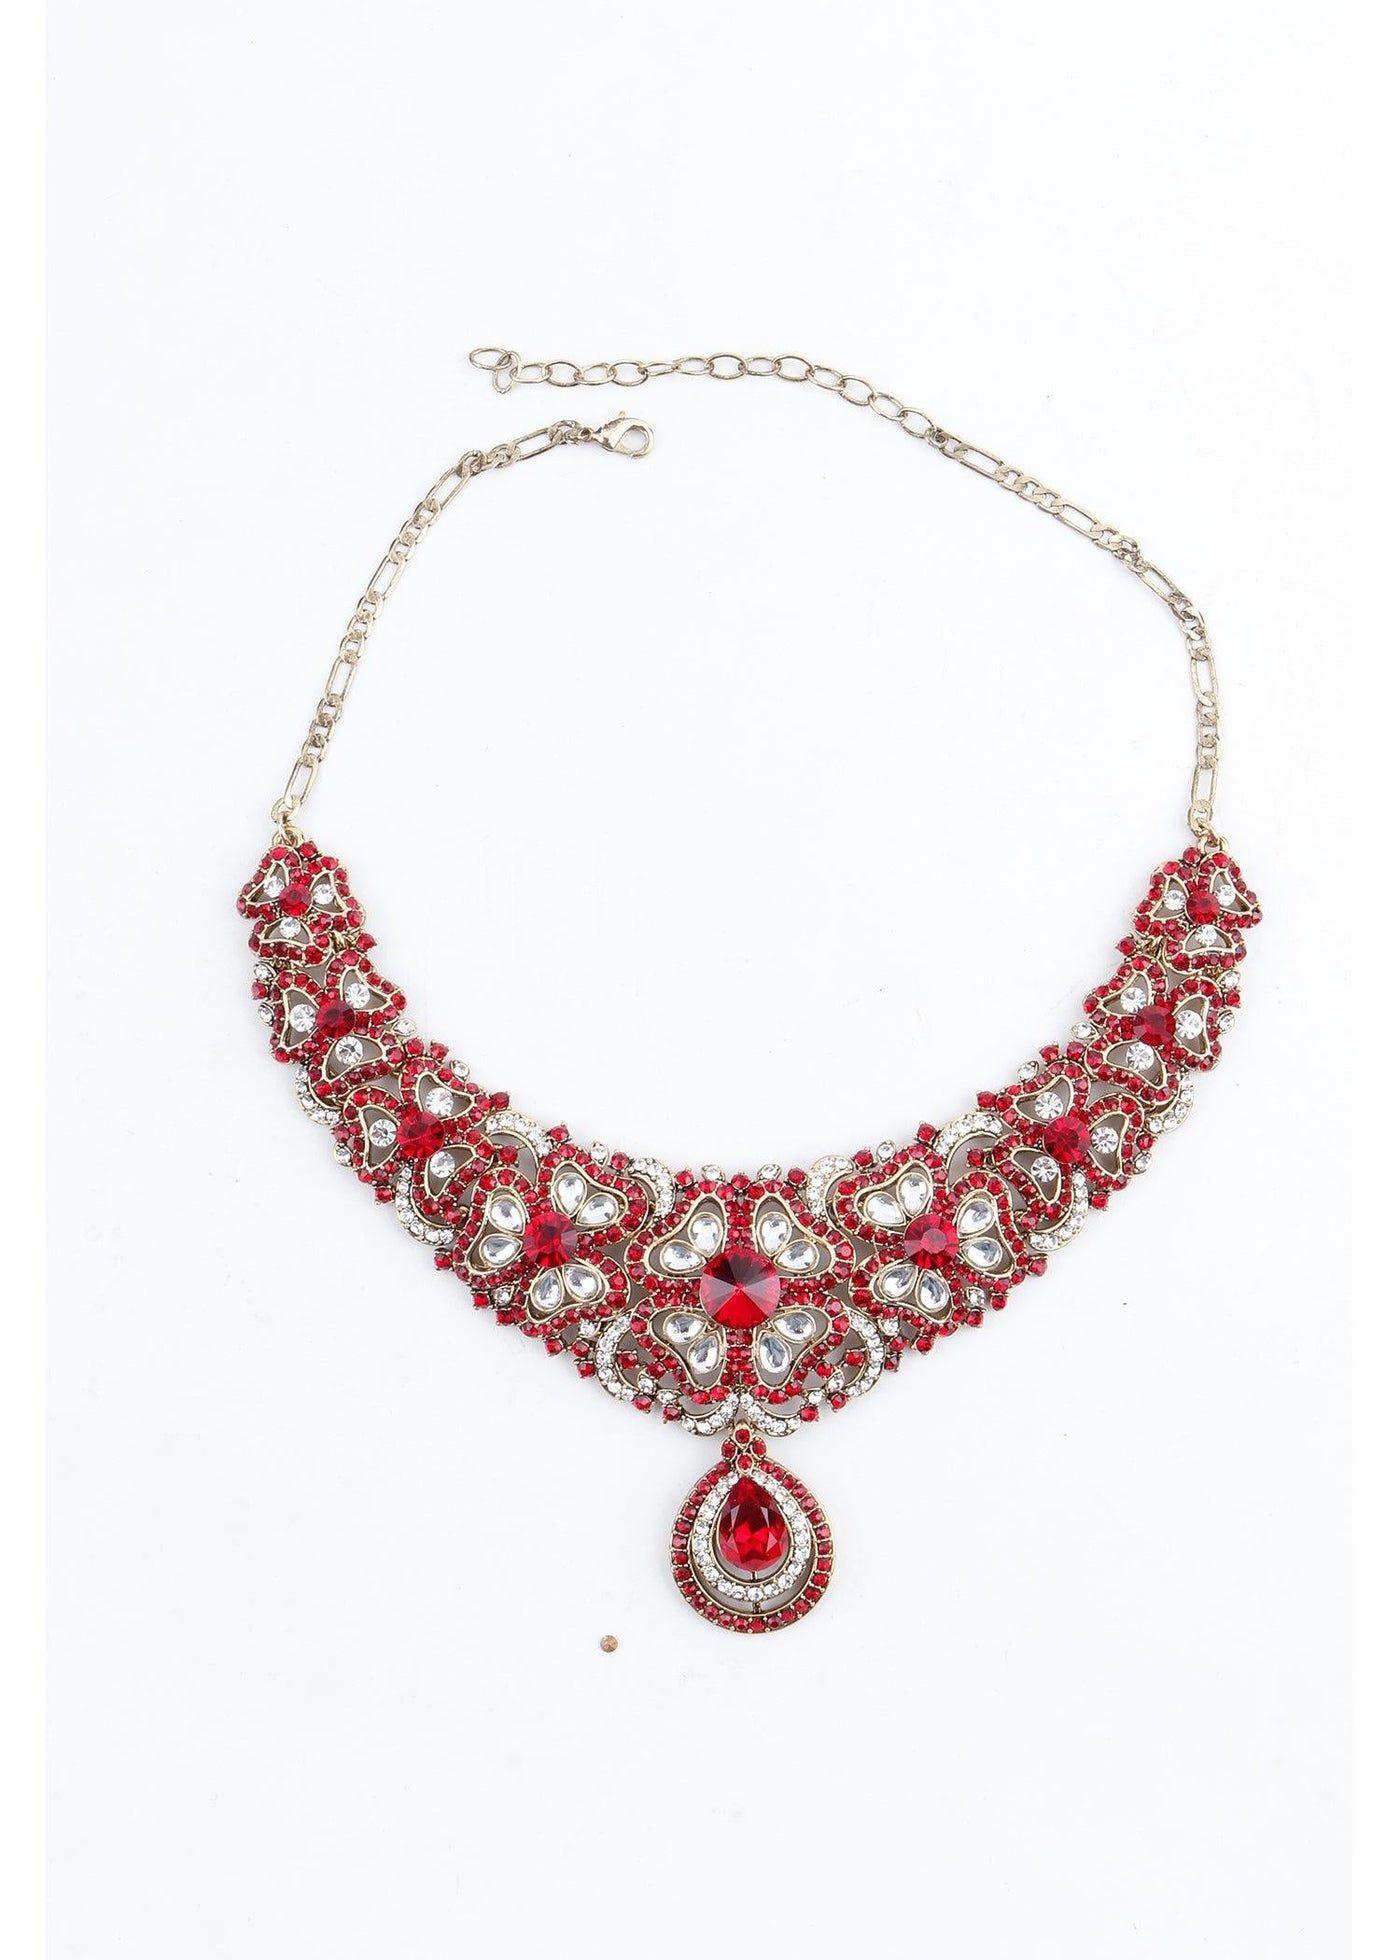 Handmade unique red crystal jewelry, made with red crystal beads and multi  tone metal pendant